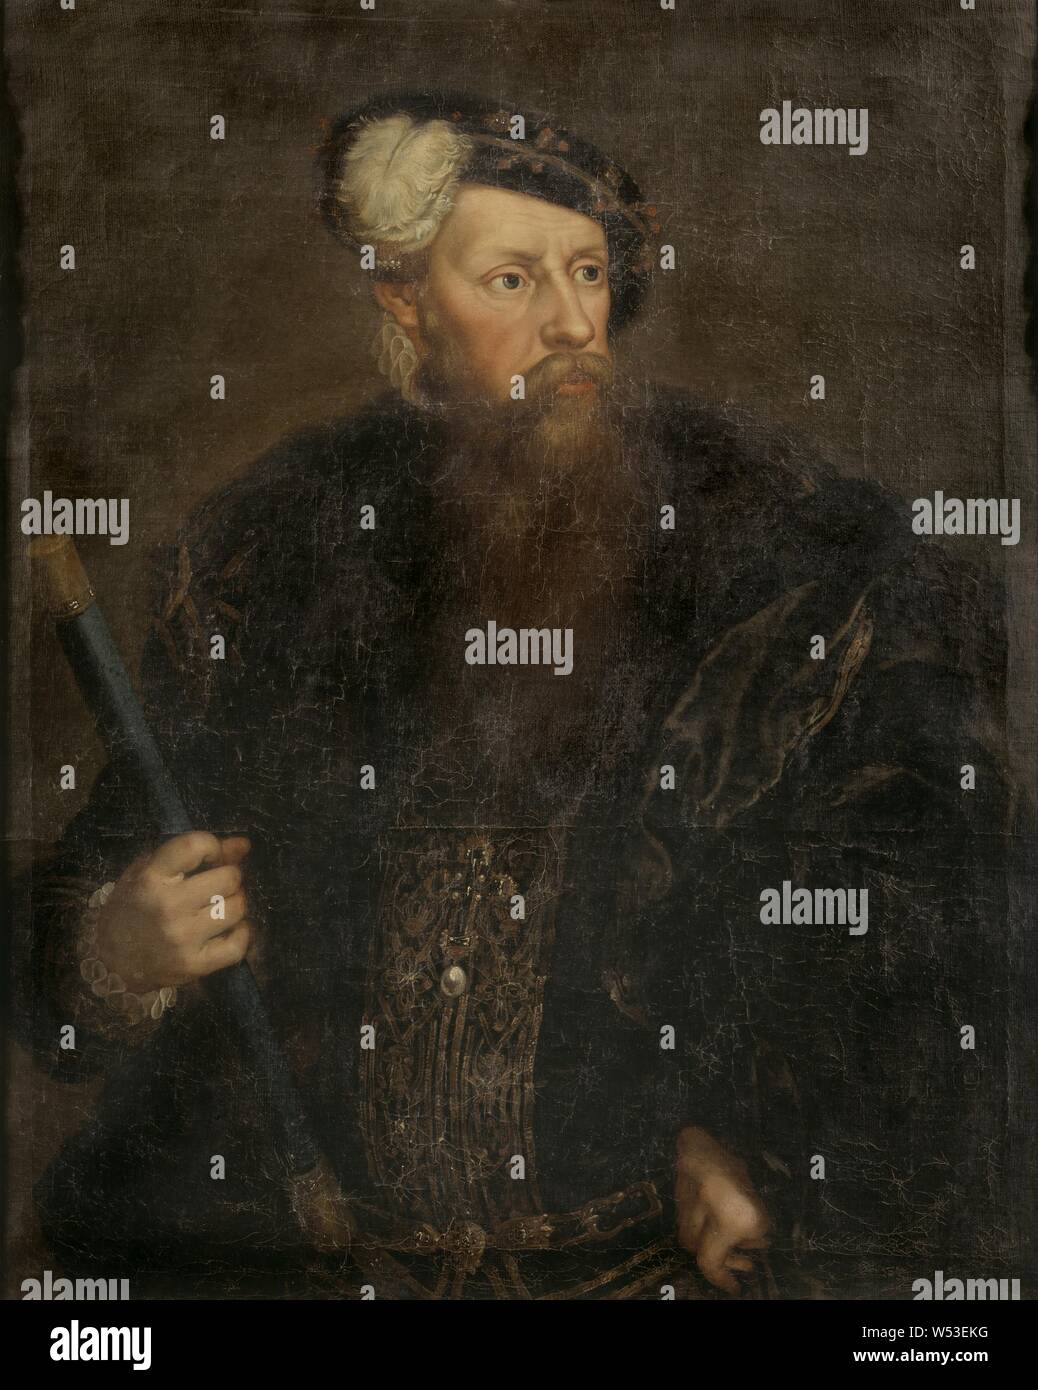 Attributed to Lorens Pasch the Younger, King Gustav I, Gustav I (approx. 1497-1560), King of Sweden Swedish, Gustav Vasa (1496-1560), King of Sweden, circa 1768, Oil on canvas, Oil, on canvas, Height, 98.5 cm (38.7 inches), Width, 78.5 cm (30.9 inches) Stock Photo